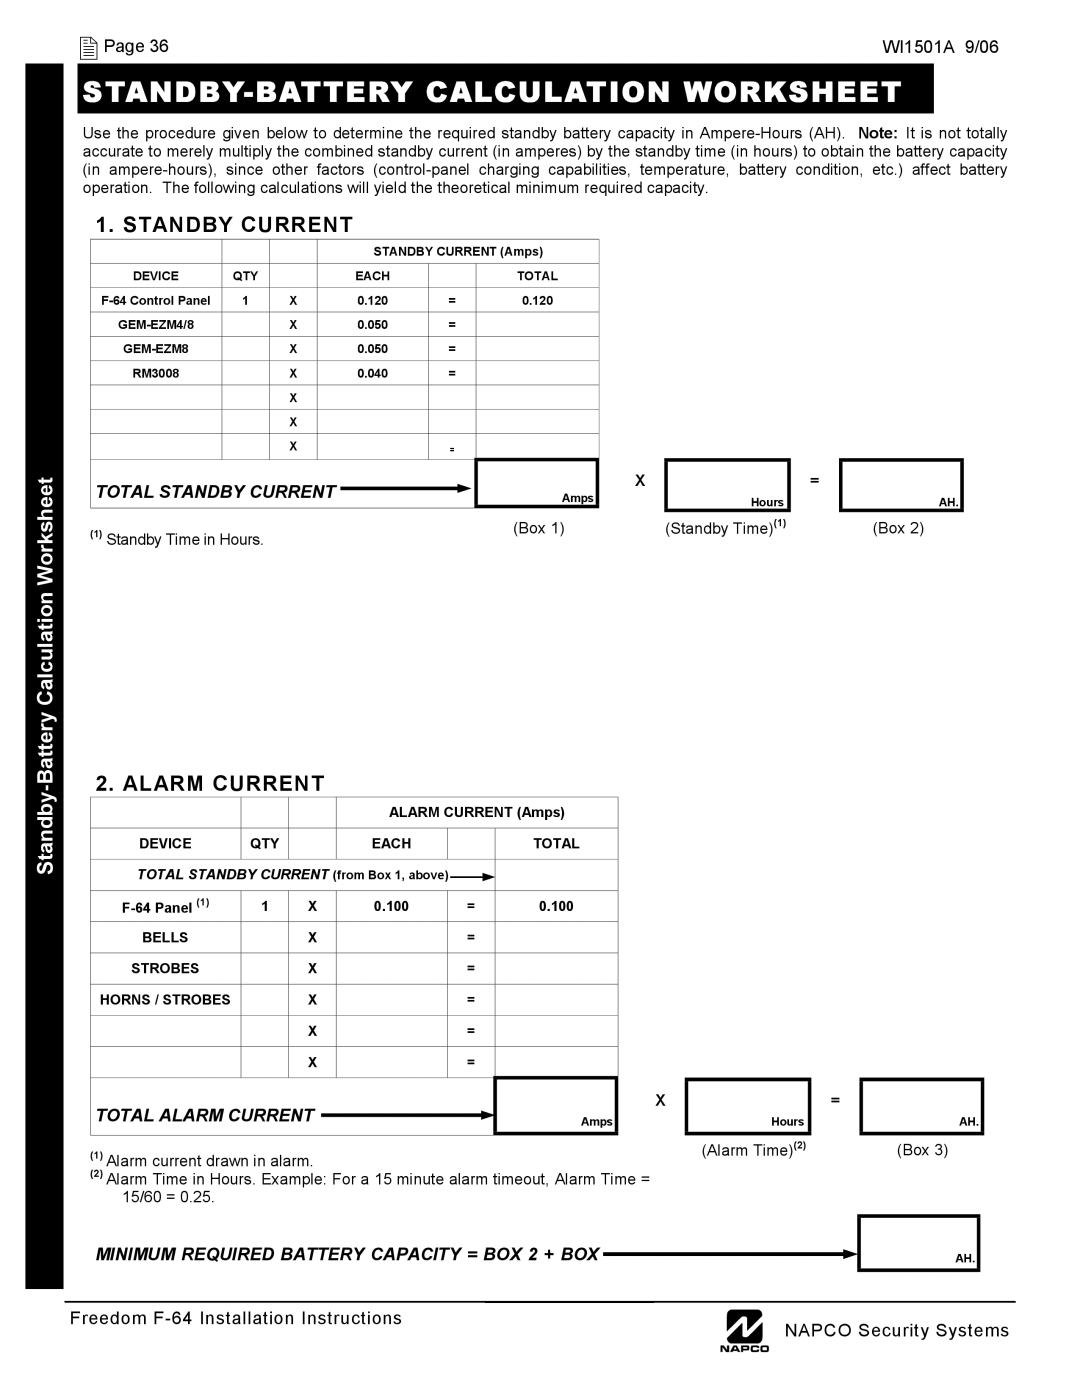 Napco Security Technologies WI1501A Standby-Batterycalculation Worksheet, Standby Current, Alarm Current 